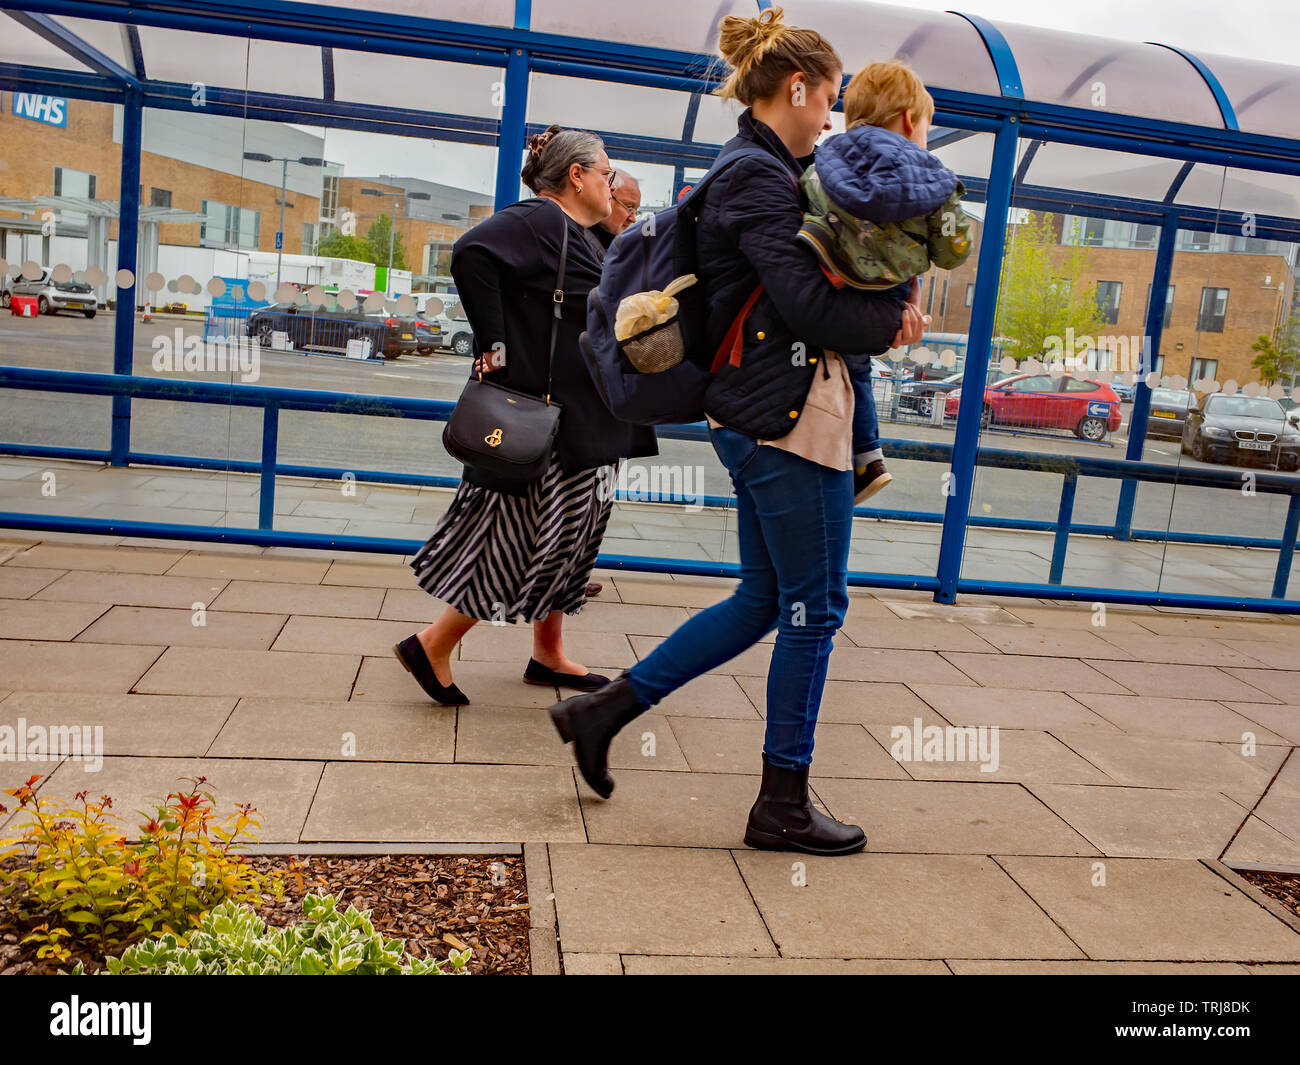 Norwich, Norfolk, UK. 18 May 2019. Candid photos – A mother carrying child outside the NHS Norwich University Hospital Stock Photo